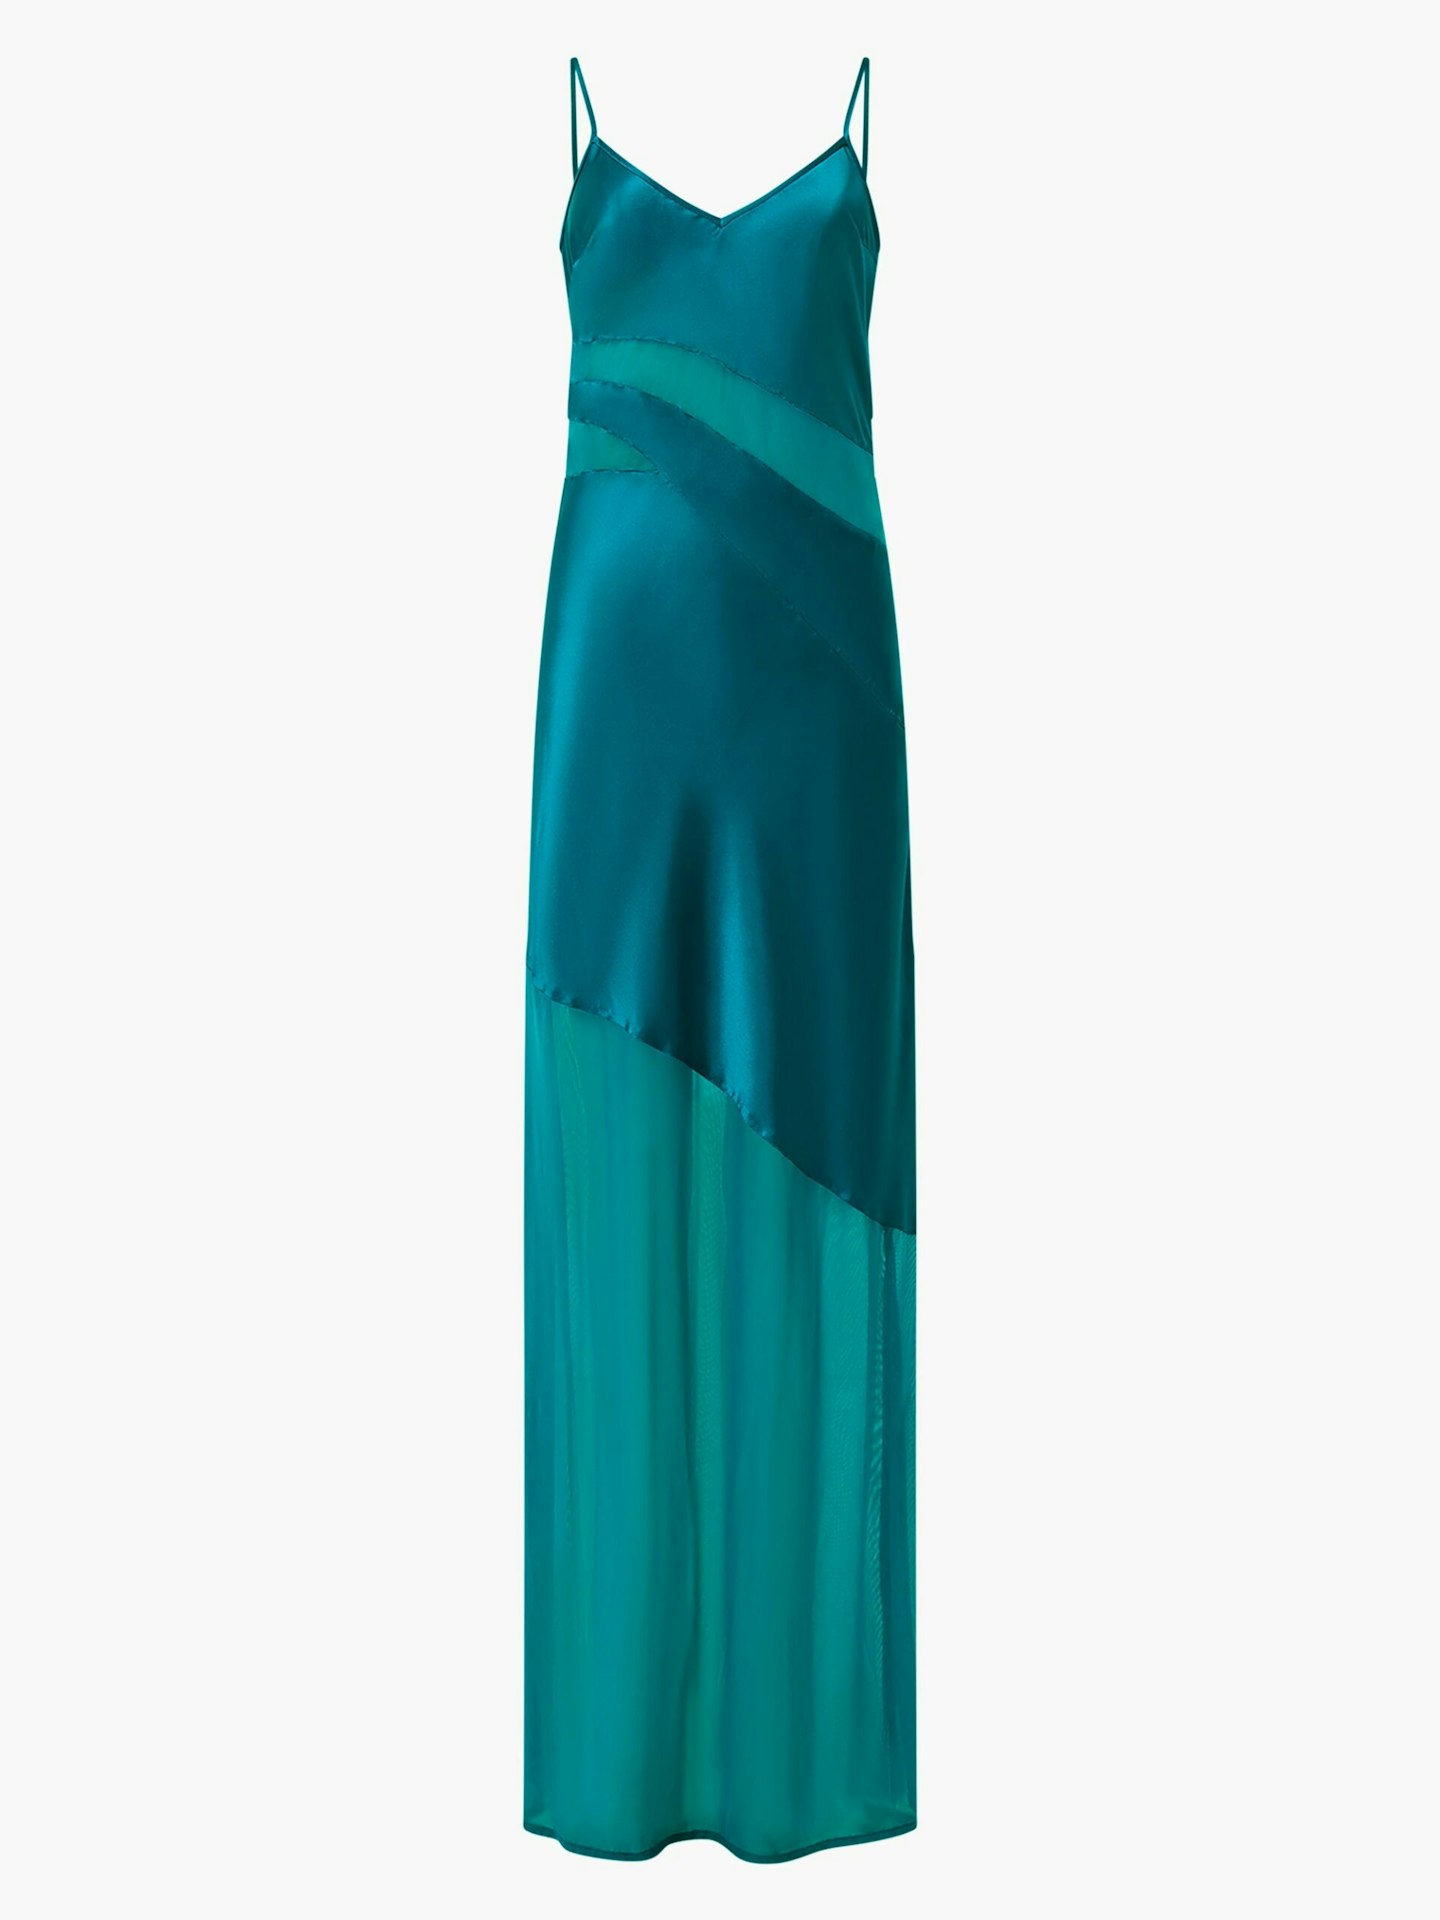 French Connection, Inu Satin Strappy Mesh Maxi Dress